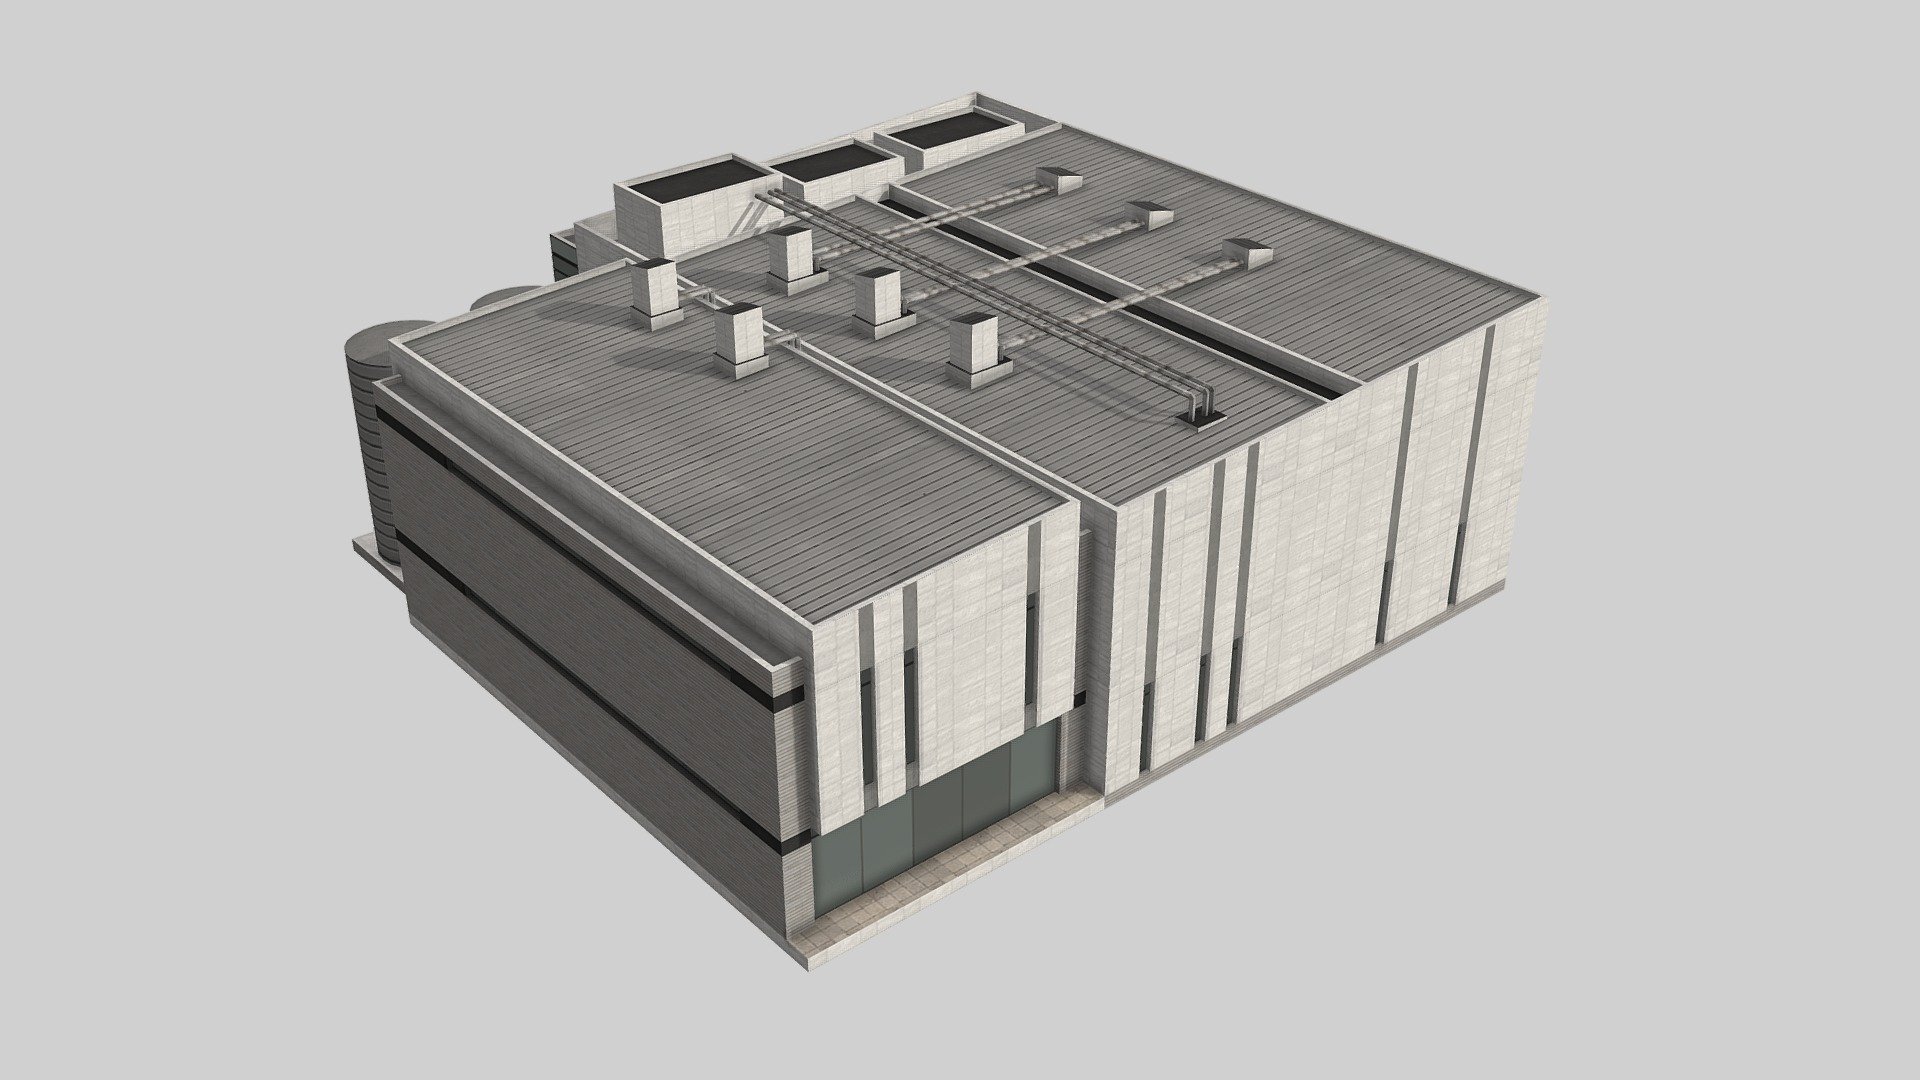 Cities Skylines 
j.p - regular collection 

Generic Industrial Building model by jorge.puerta

YDFpharma Facilities B2 on Steam

j.p - regular collection on Steam

Support me on Patreon - YDFpharma Facilities B2 (Cities Skylines Assets) - Buy Royalty Free 3D model by jorgepuerta 3d model